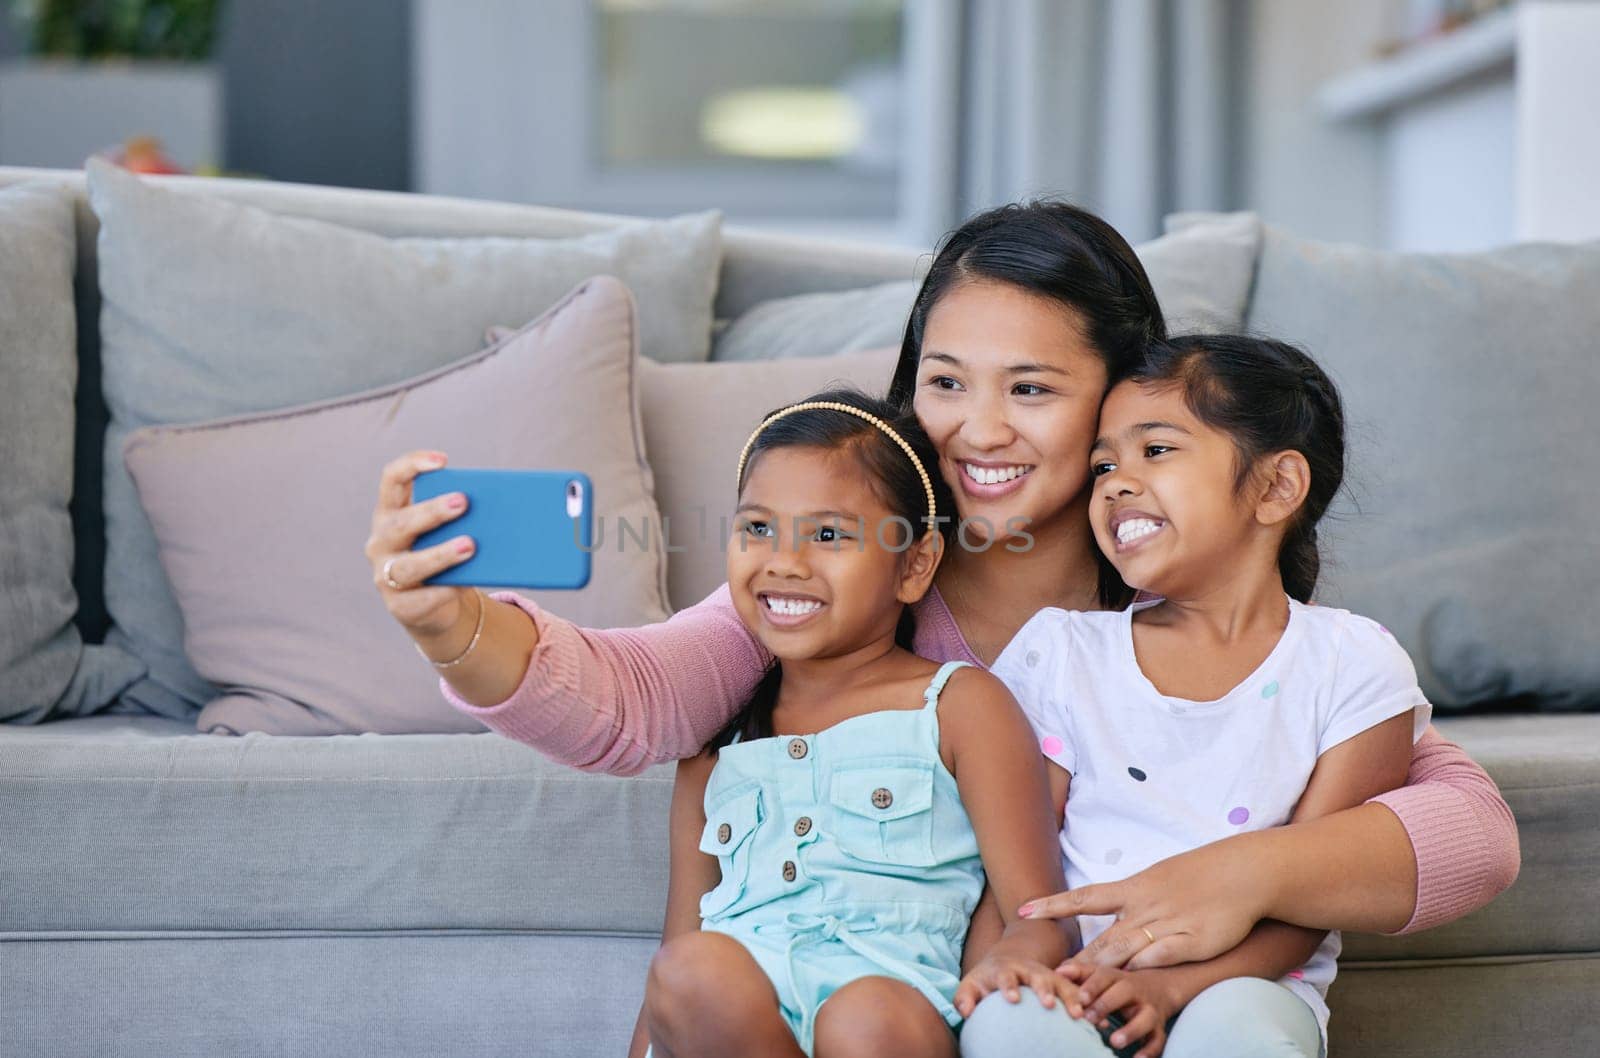 Mom, girl and happy with selfie for bonding or support, love and growth for child development. Parent, kid and satisfied at home with care, childhood memories and together with trust and smile.